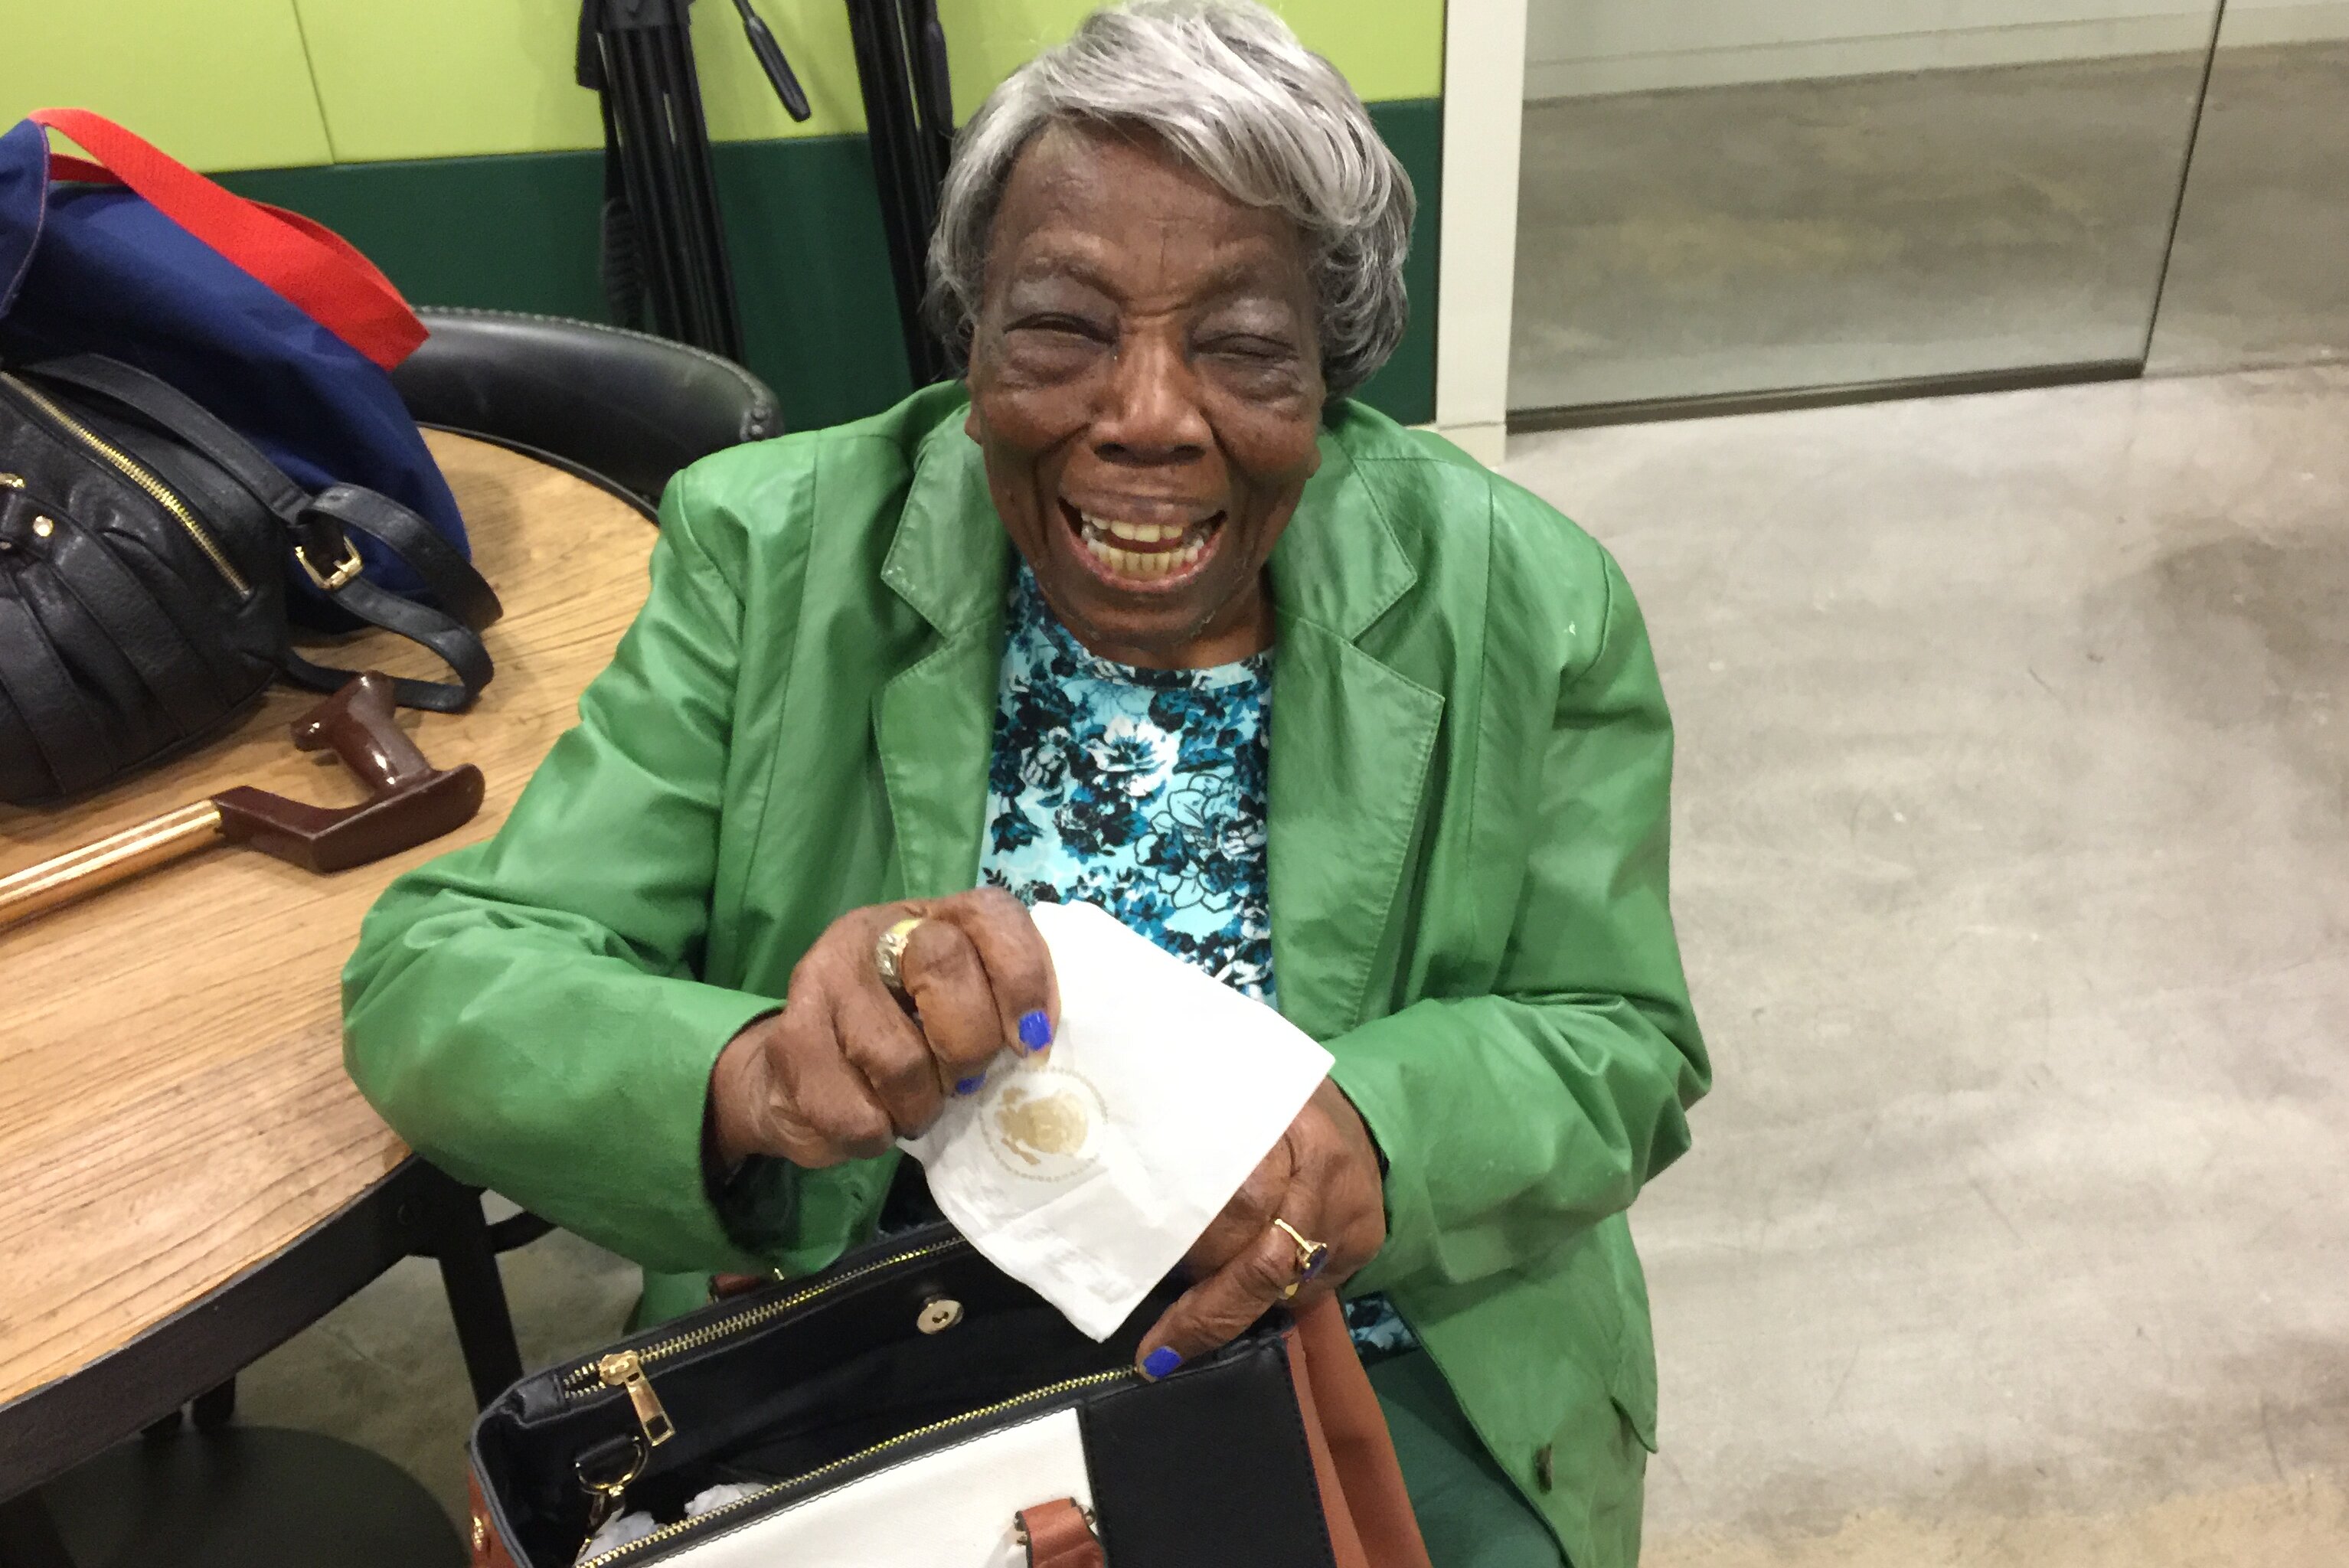 She Danced With The Obamas At 106 Now She Has More Plans As She Turns 110 Years Old Wtop News